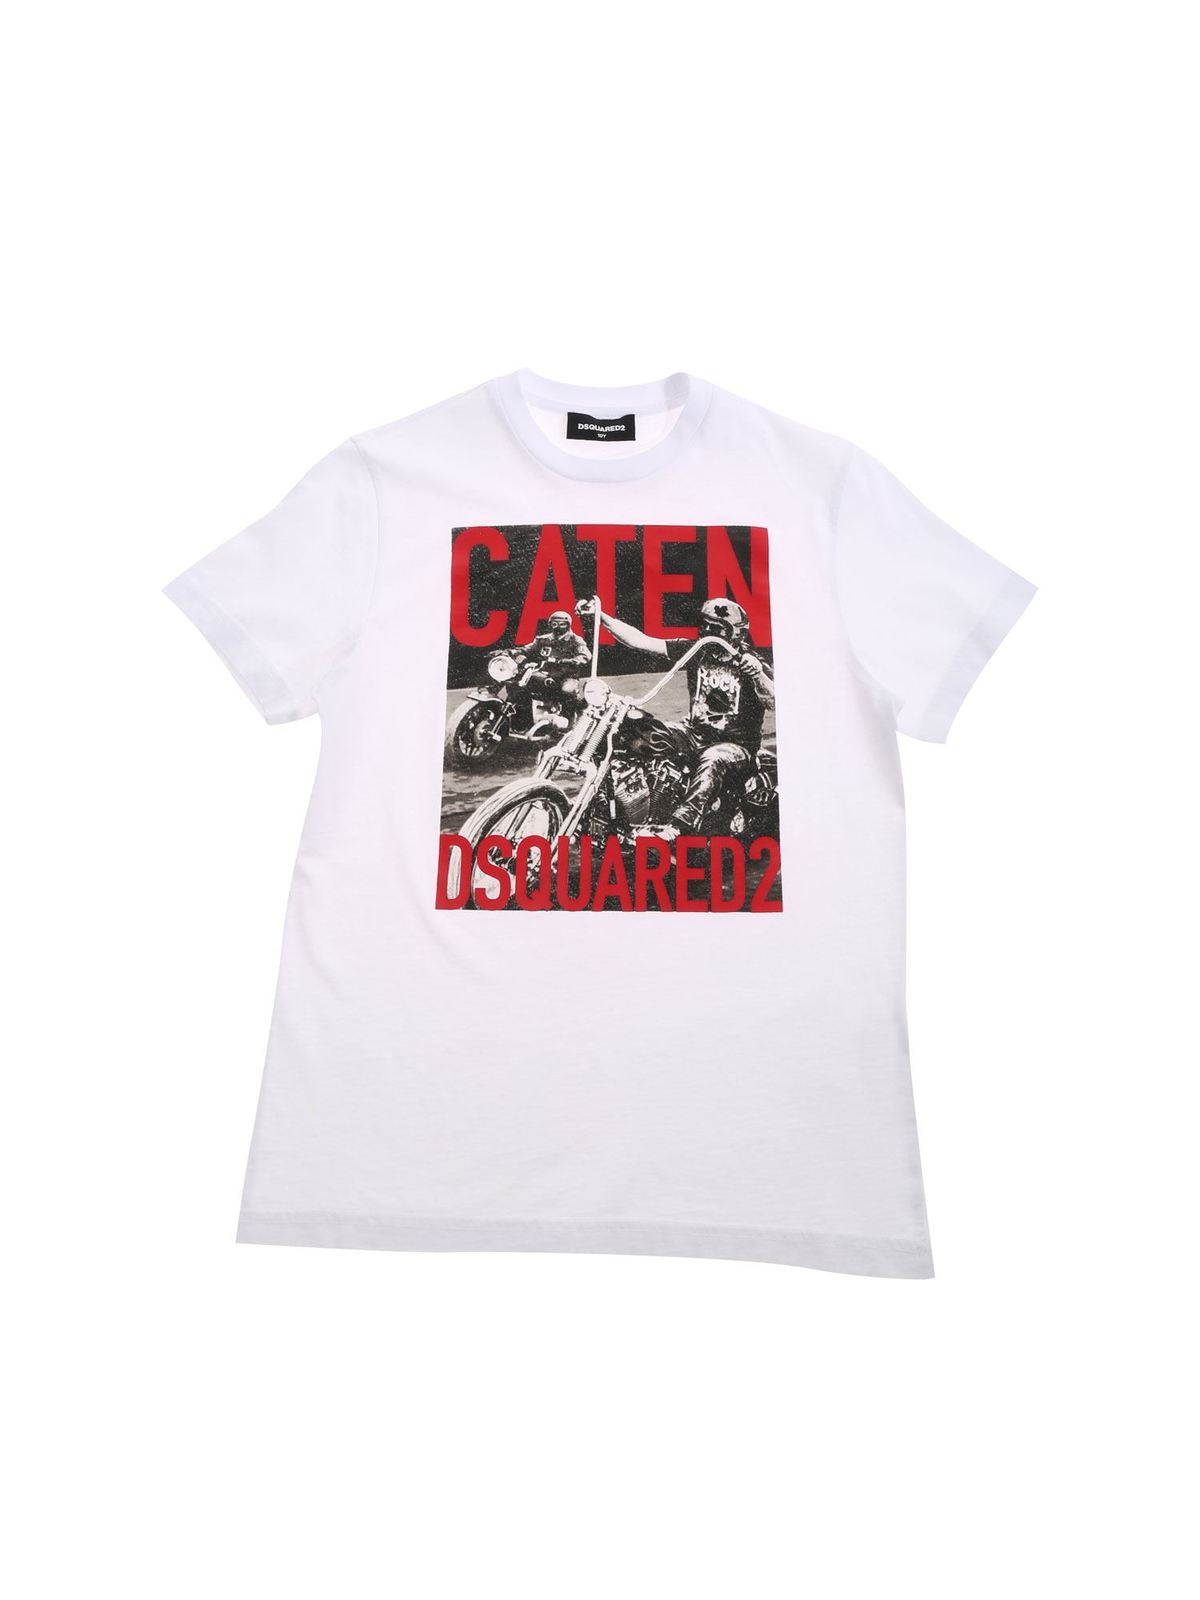 DSQUARED2 CATEN DSQUARED2 T-SHIRT IN WHITE